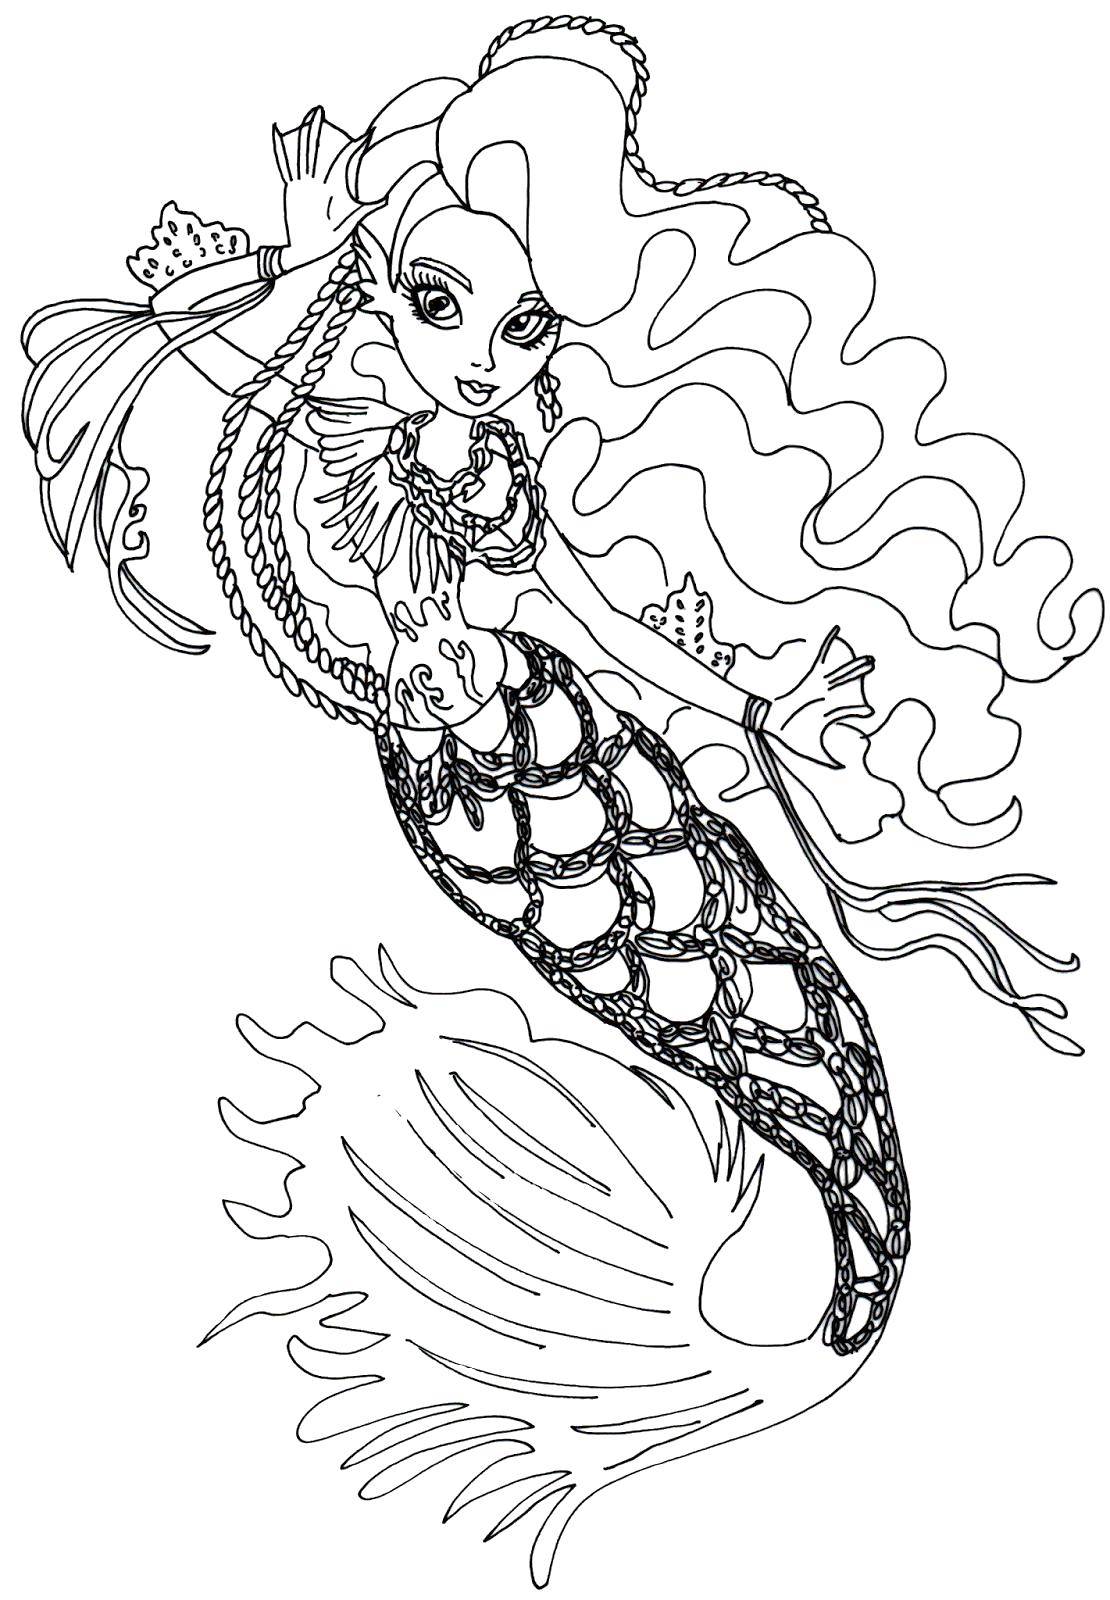 Coloring Mermaid monster high. Category Monster high. Tags:  Monster High.